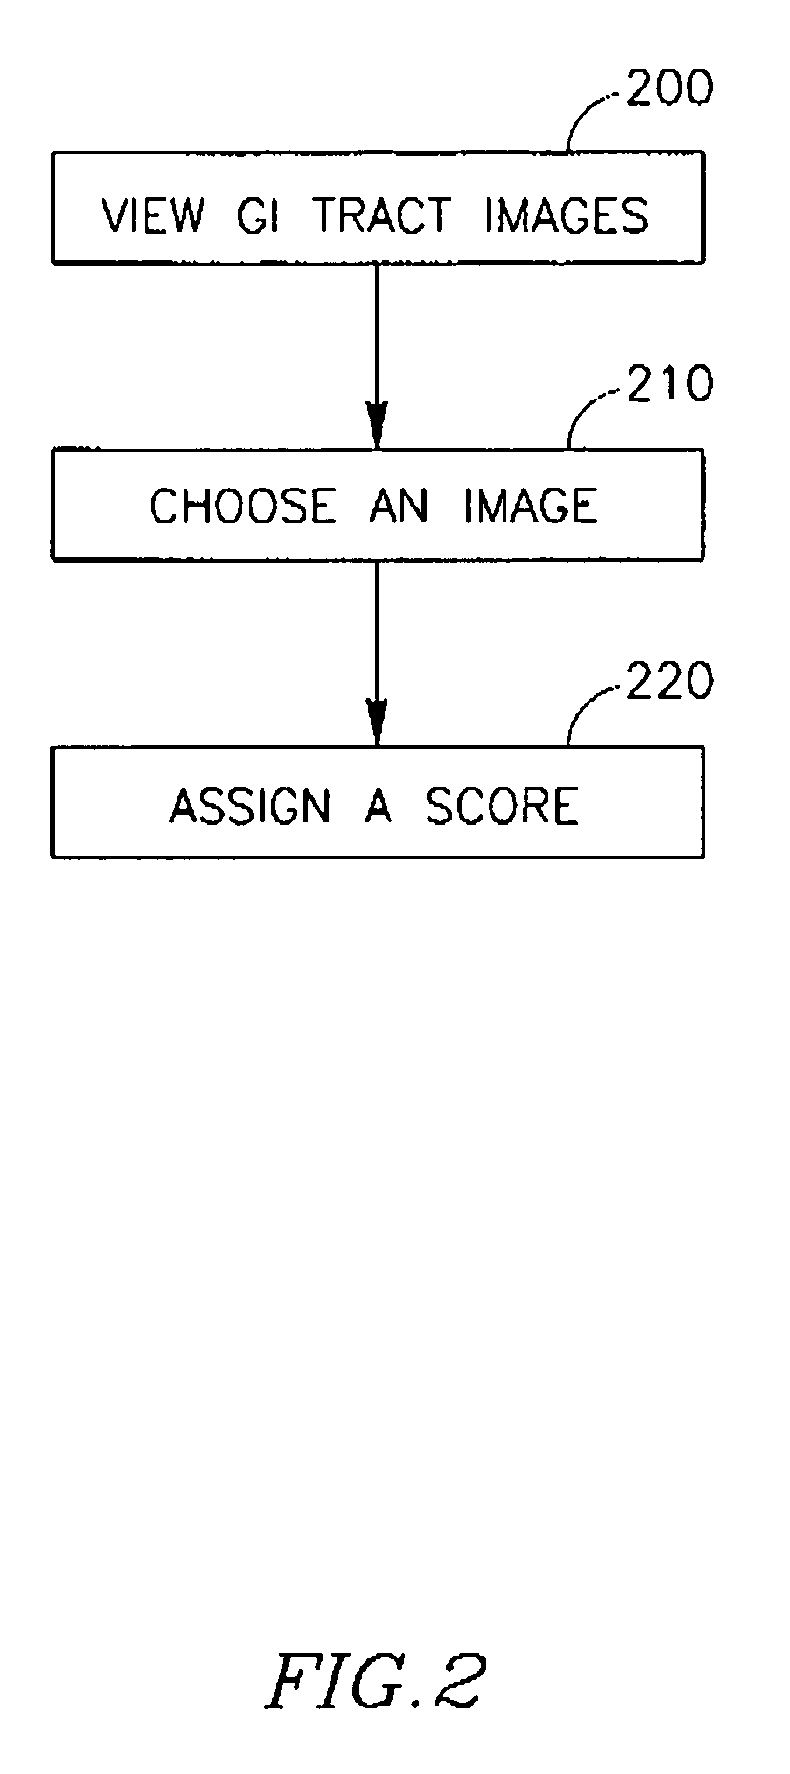 System and method for assessing a patient condition using tertiles derived from capsule endoscope images of the small bowel